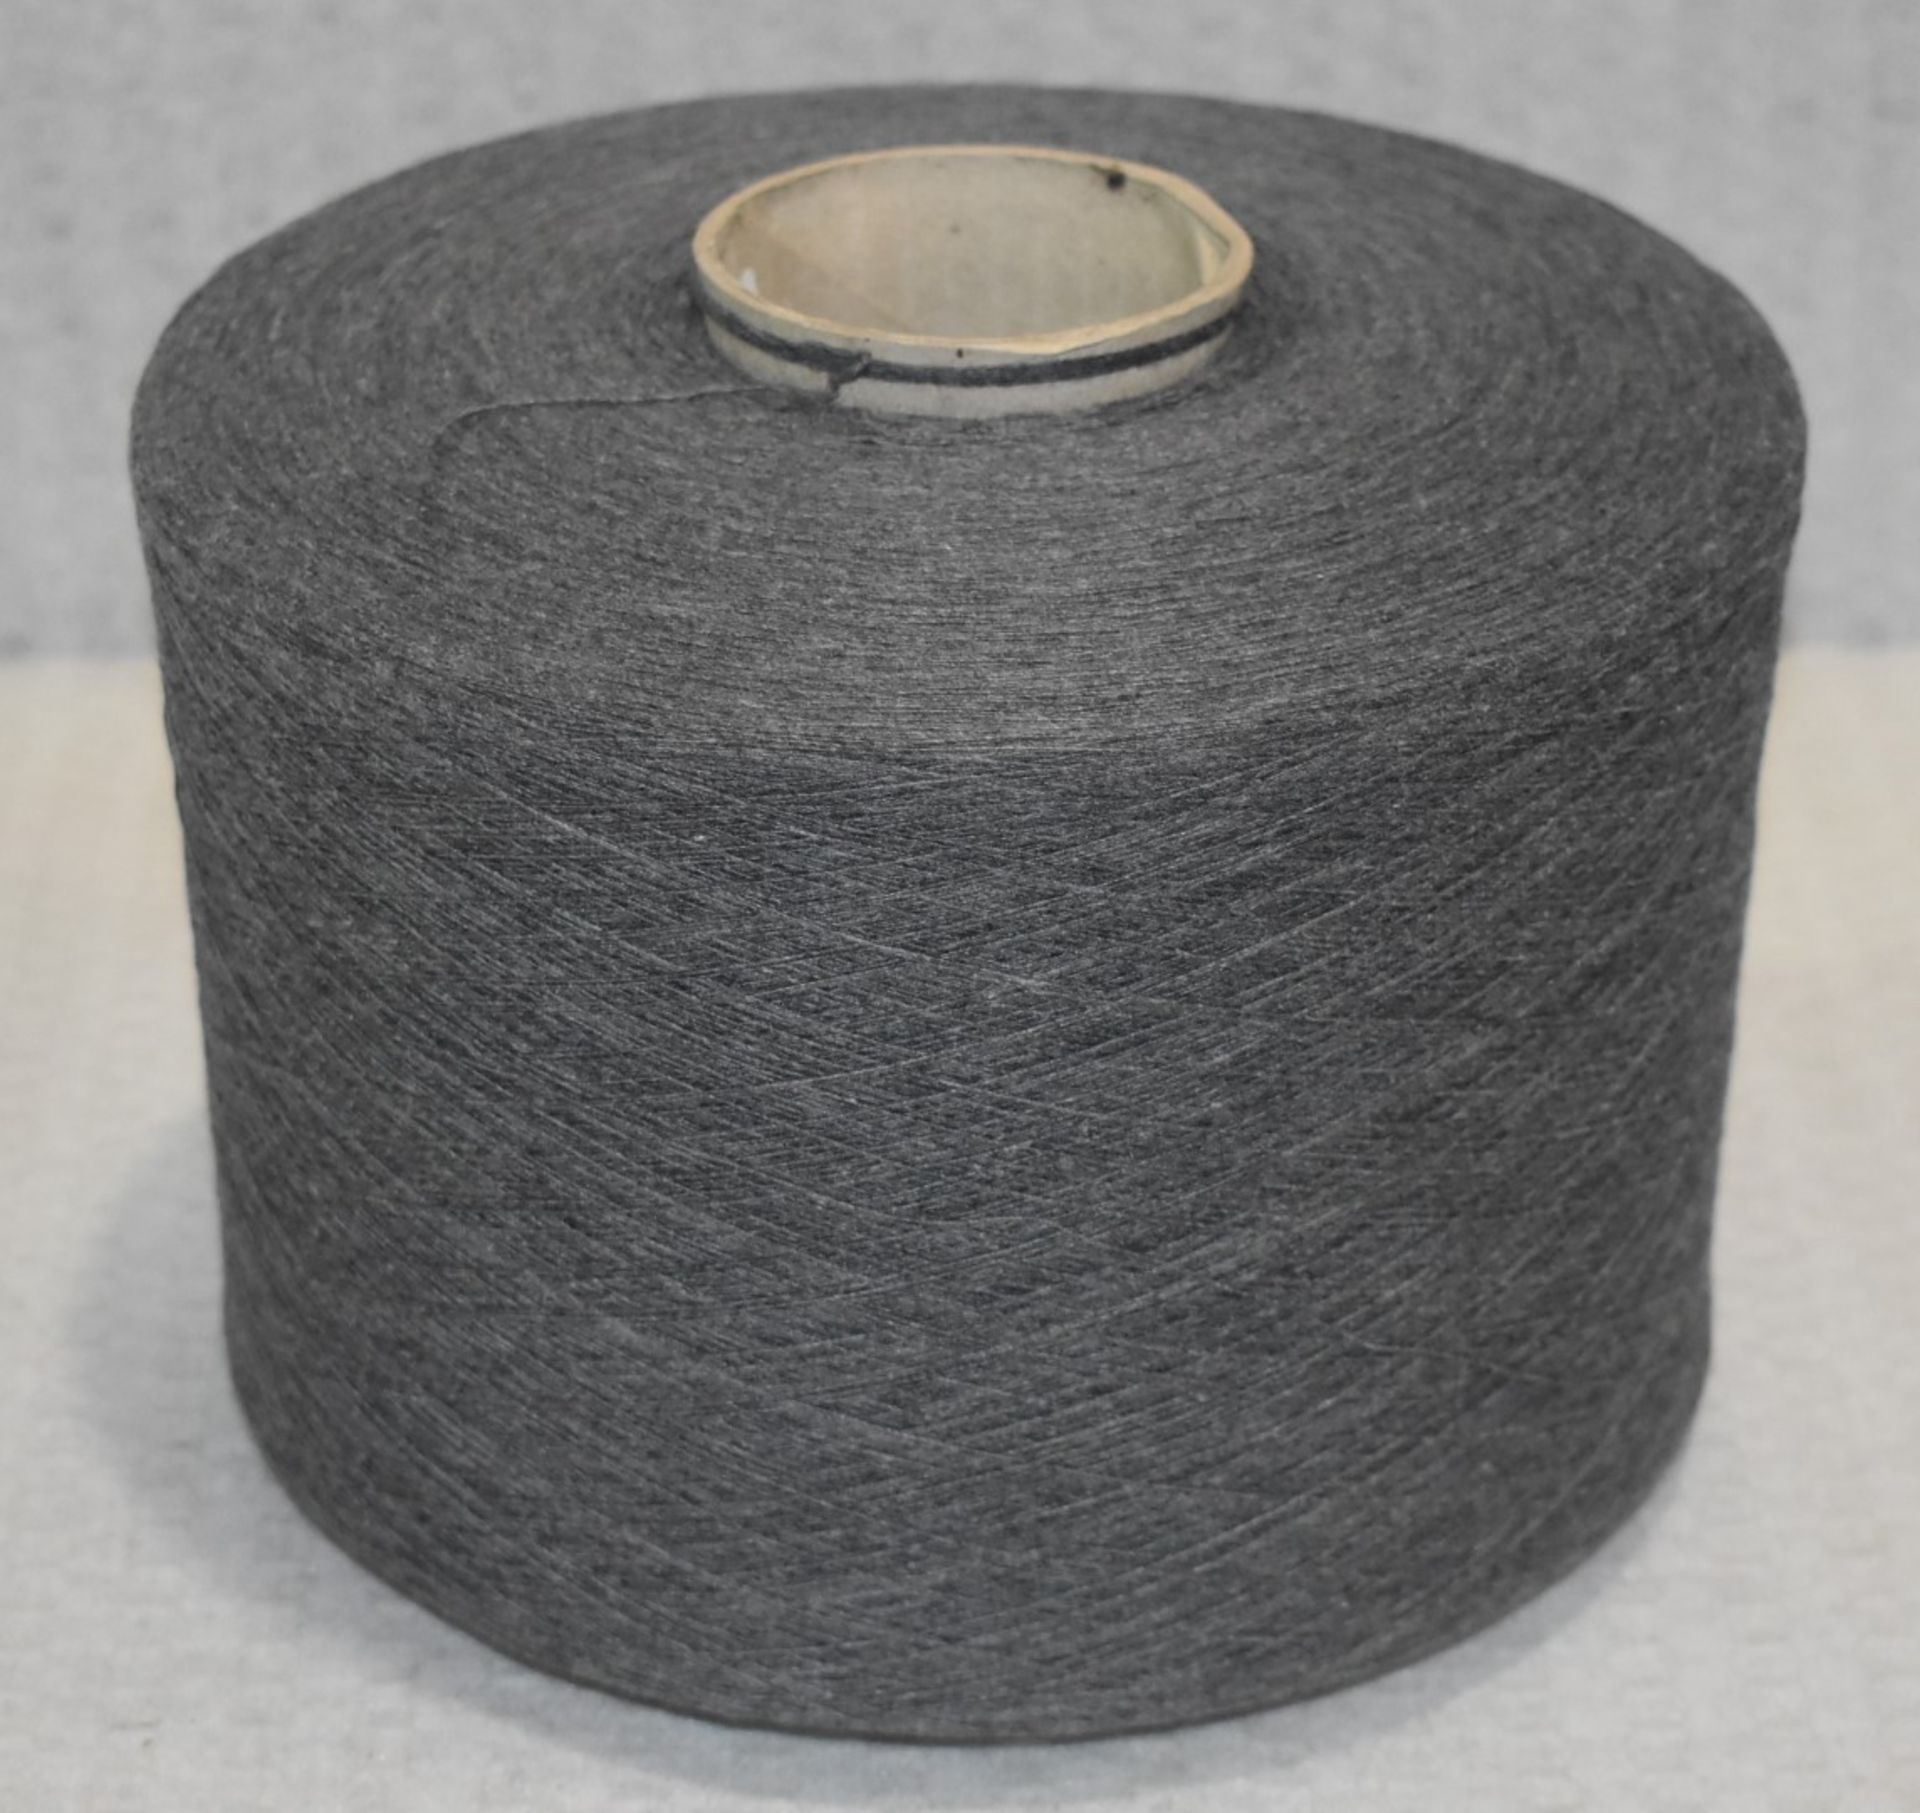 4 x Cones of 1/13 MicroCotton Knitting Yarn - Mid Grey - Approx Weight: 2,500g - New Stock ABL Yarn - Image 7 of 10